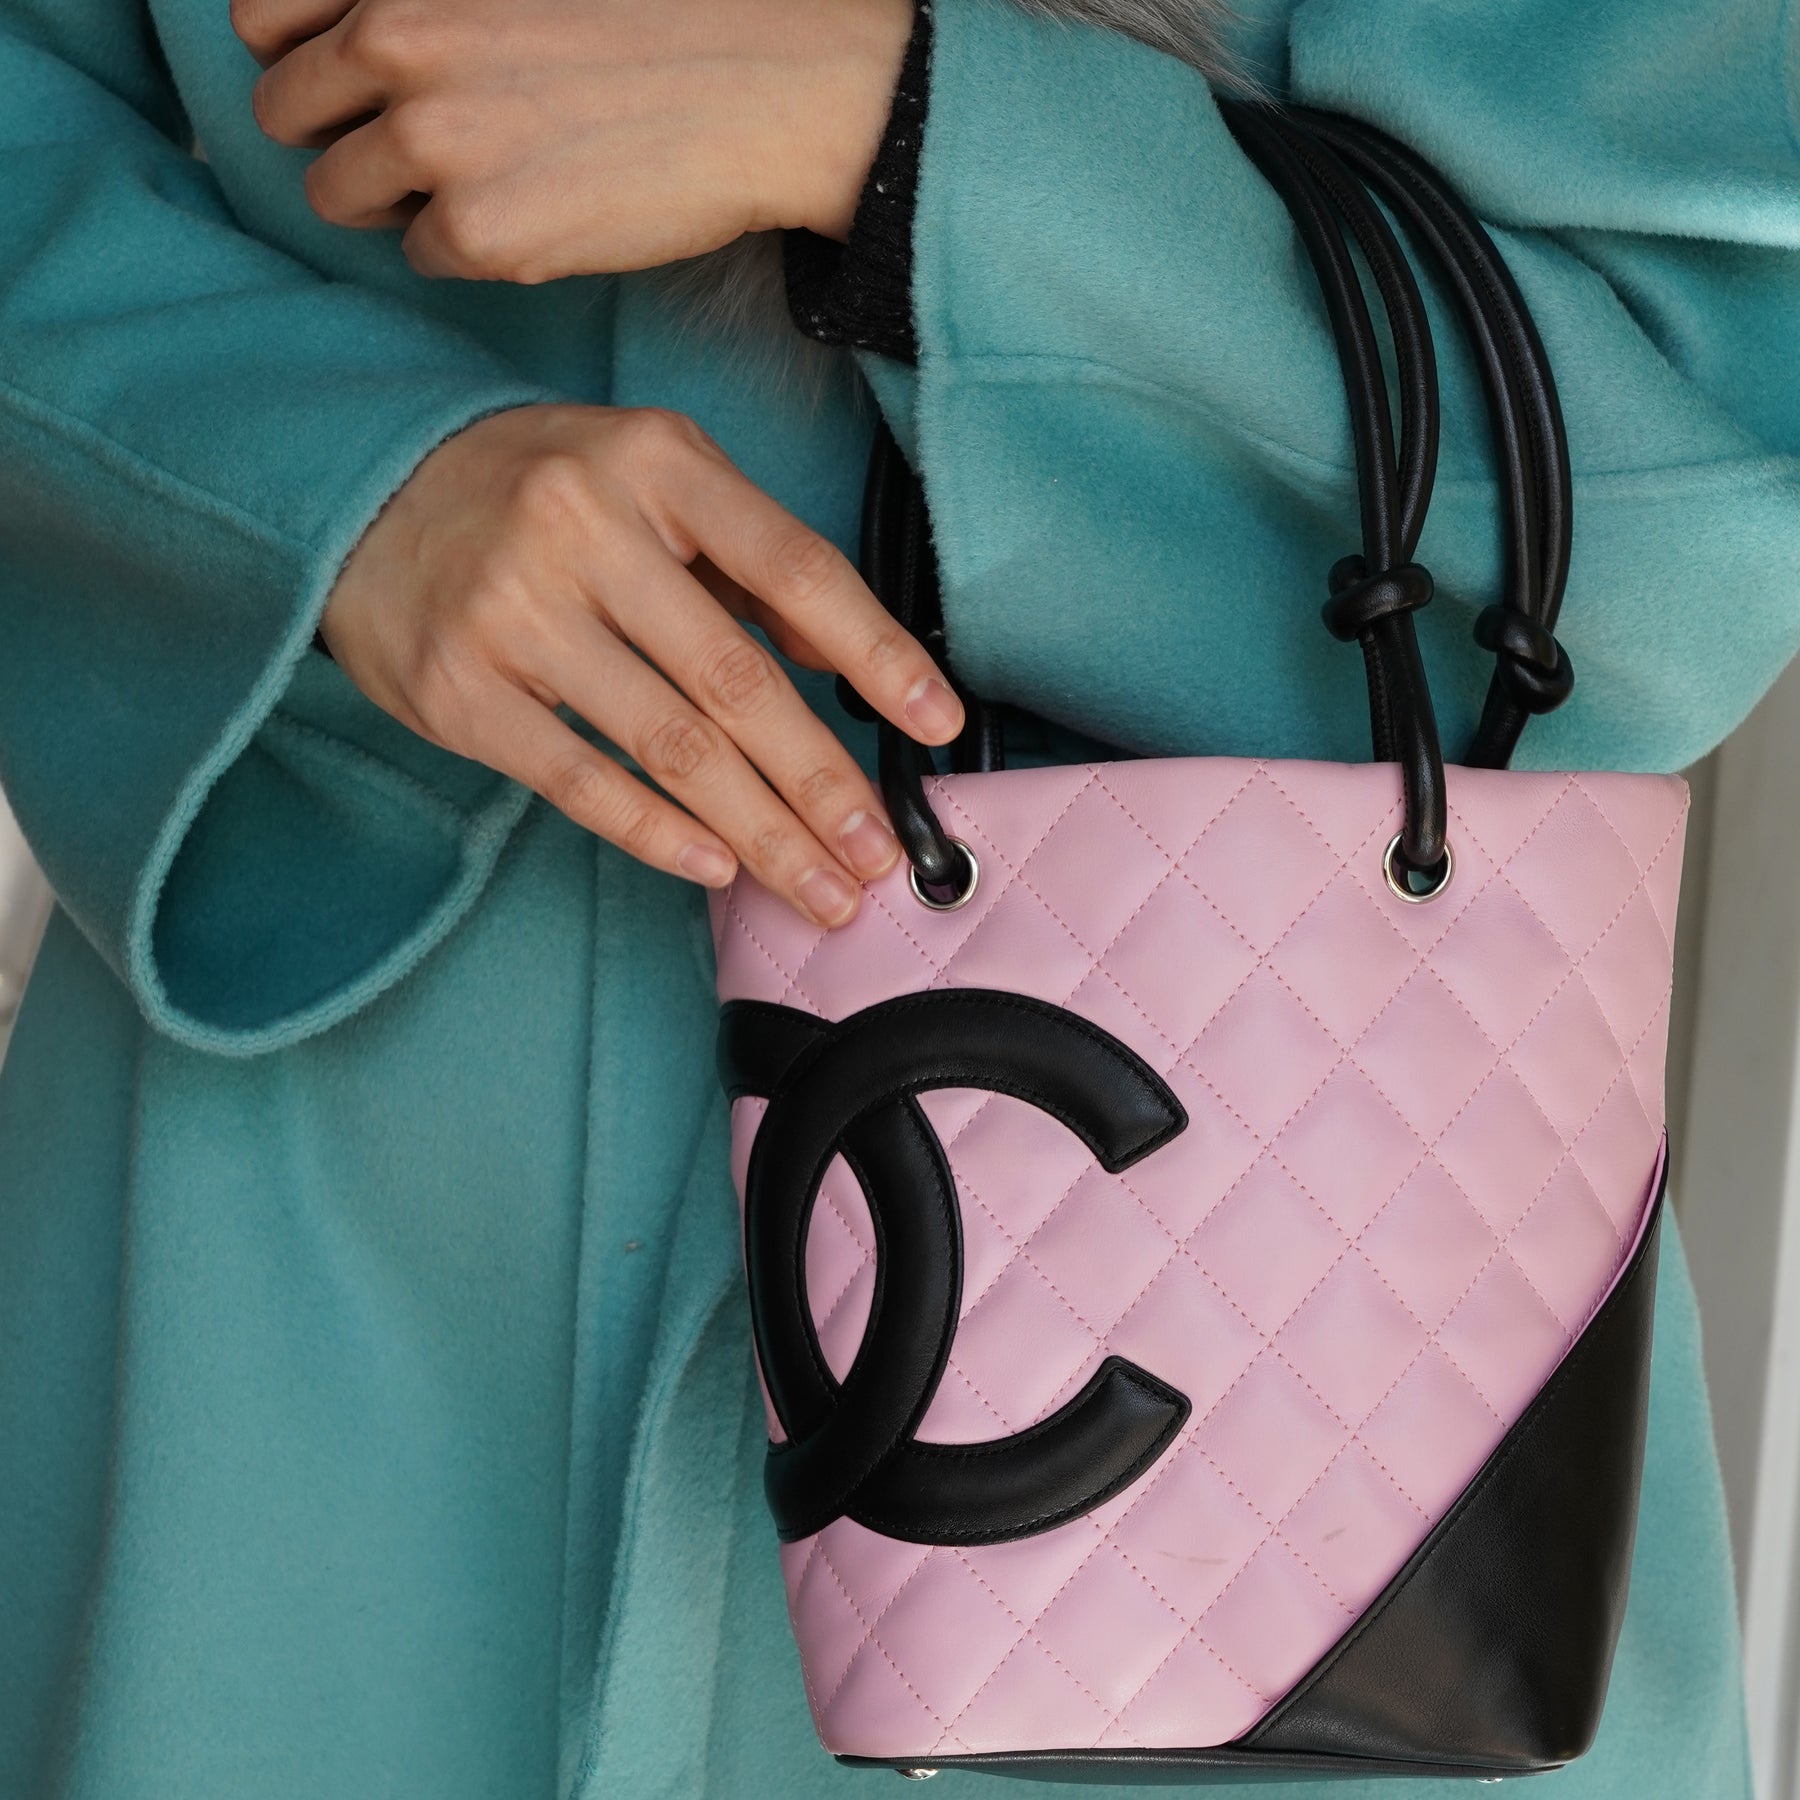 Chanel - Cambon Quilted Leather Bag Black